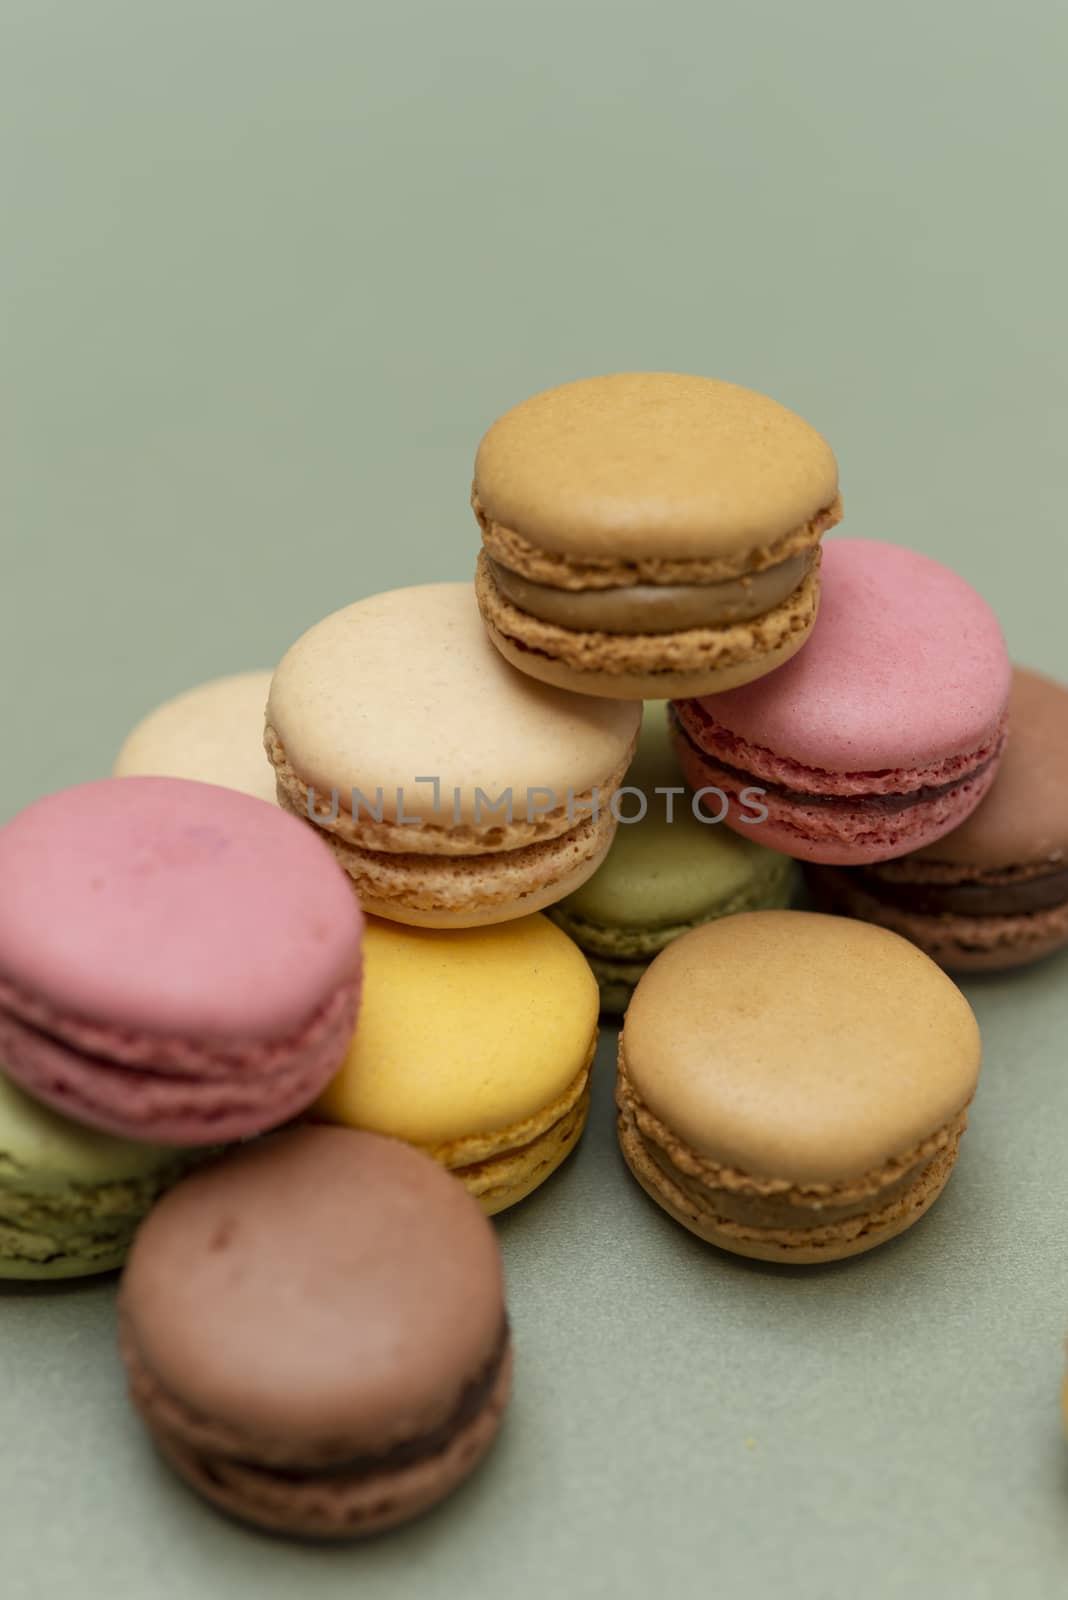 Assorted colored tasty macaroons over a green background.